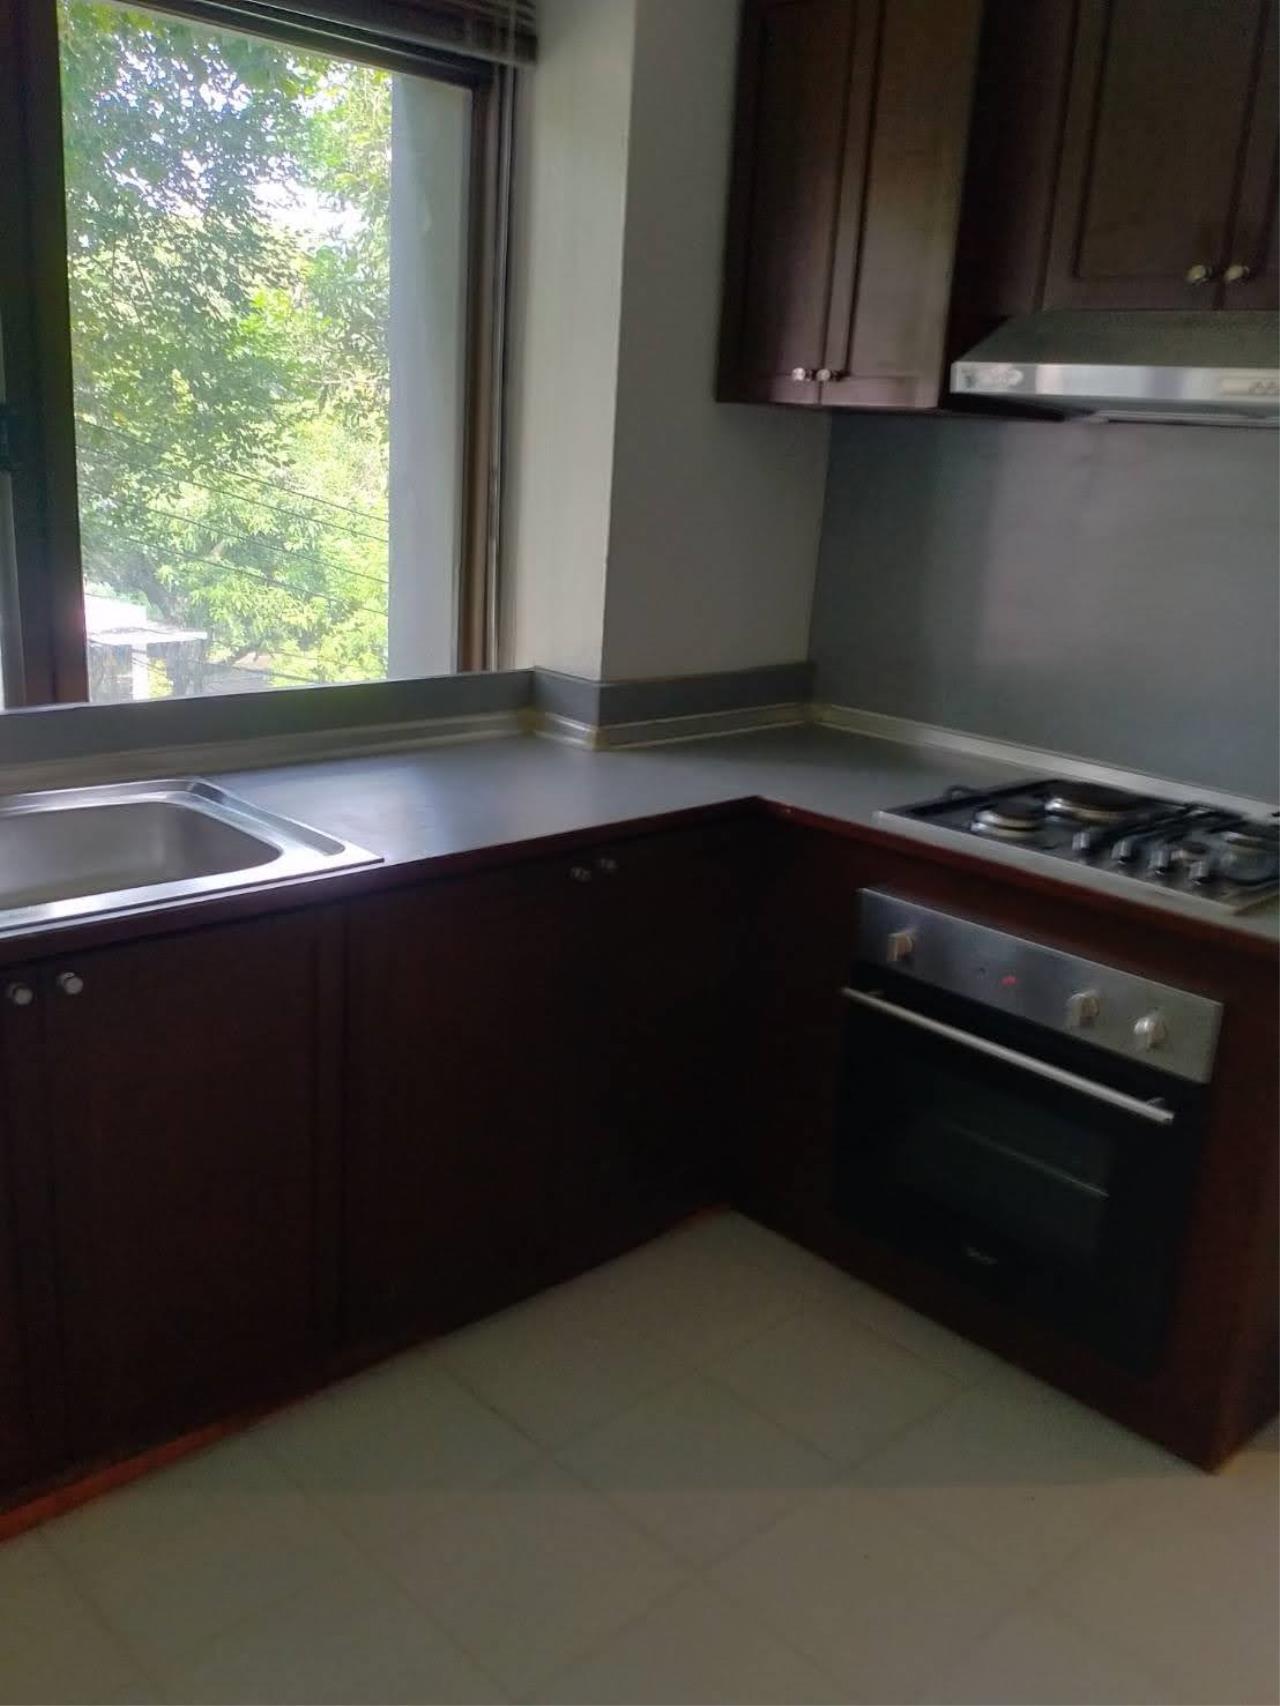 2 bedrooms 2 bathrooms panpanit apartments for rent